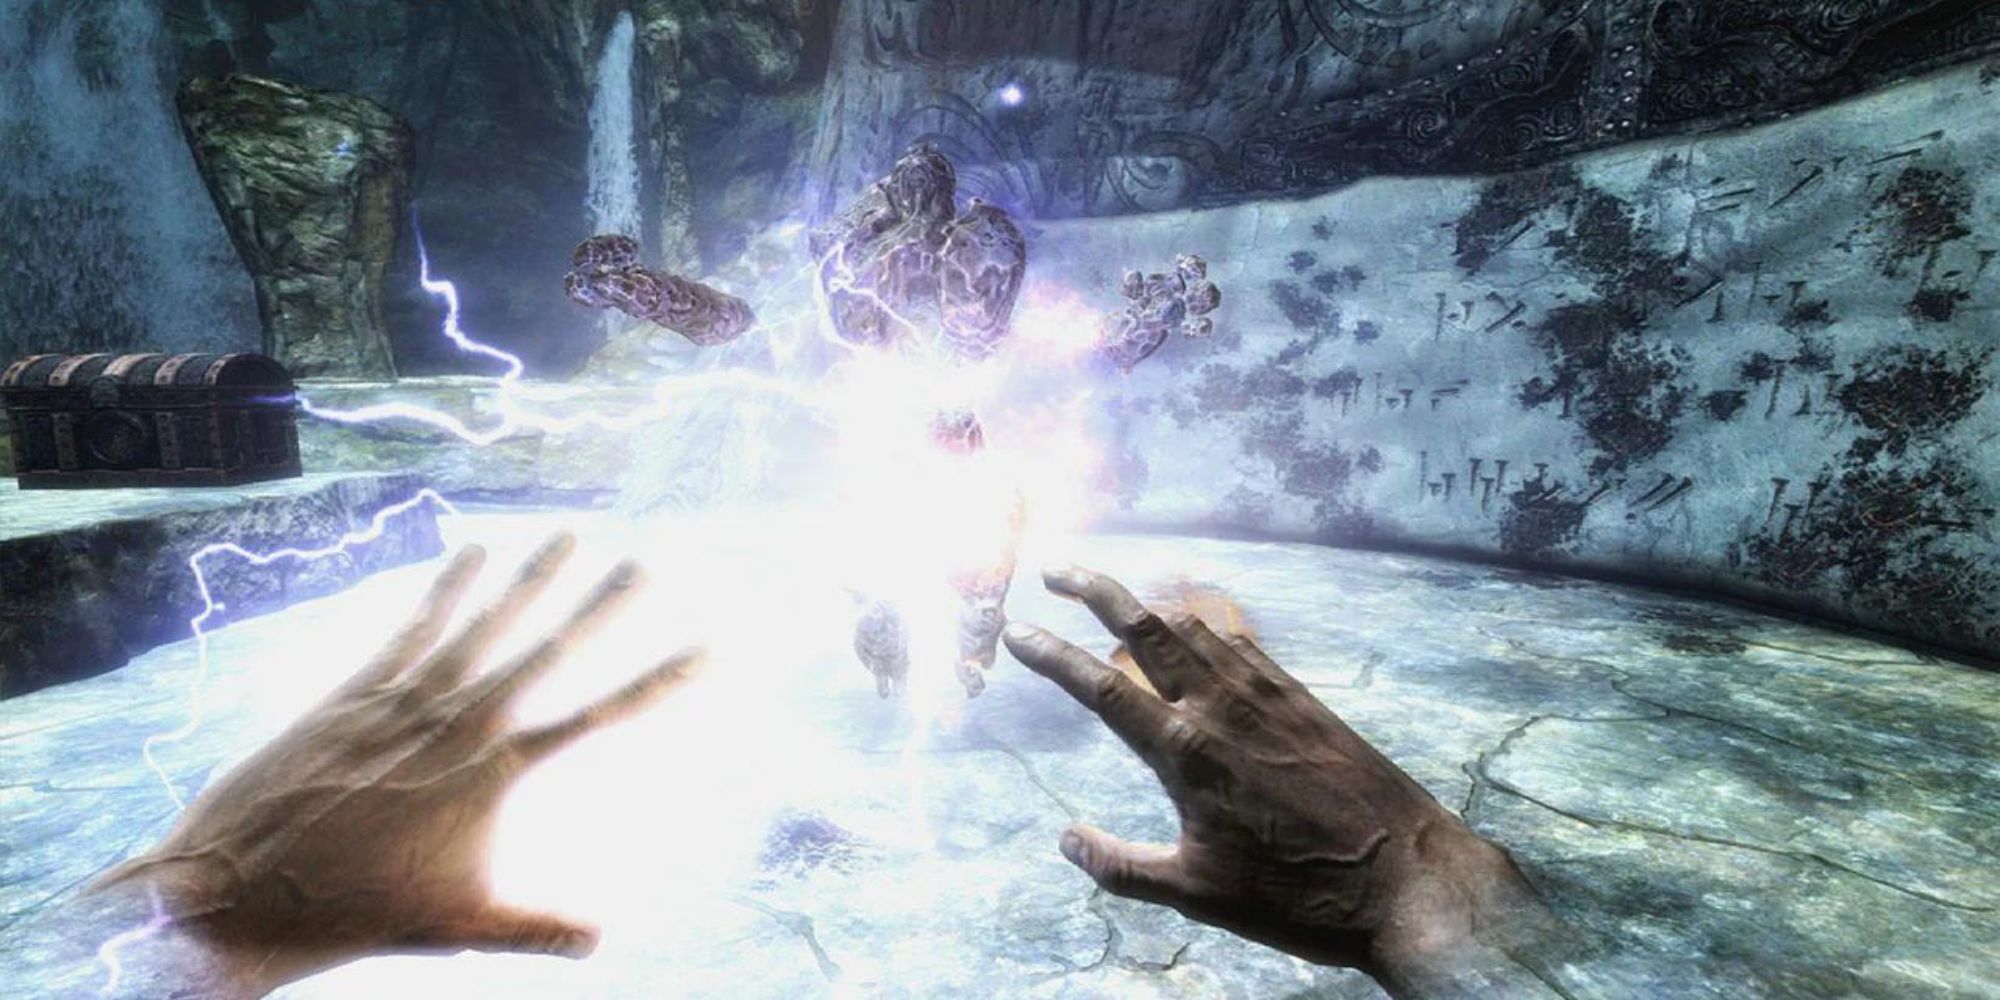 The player uses a spell on a enemy in the snow